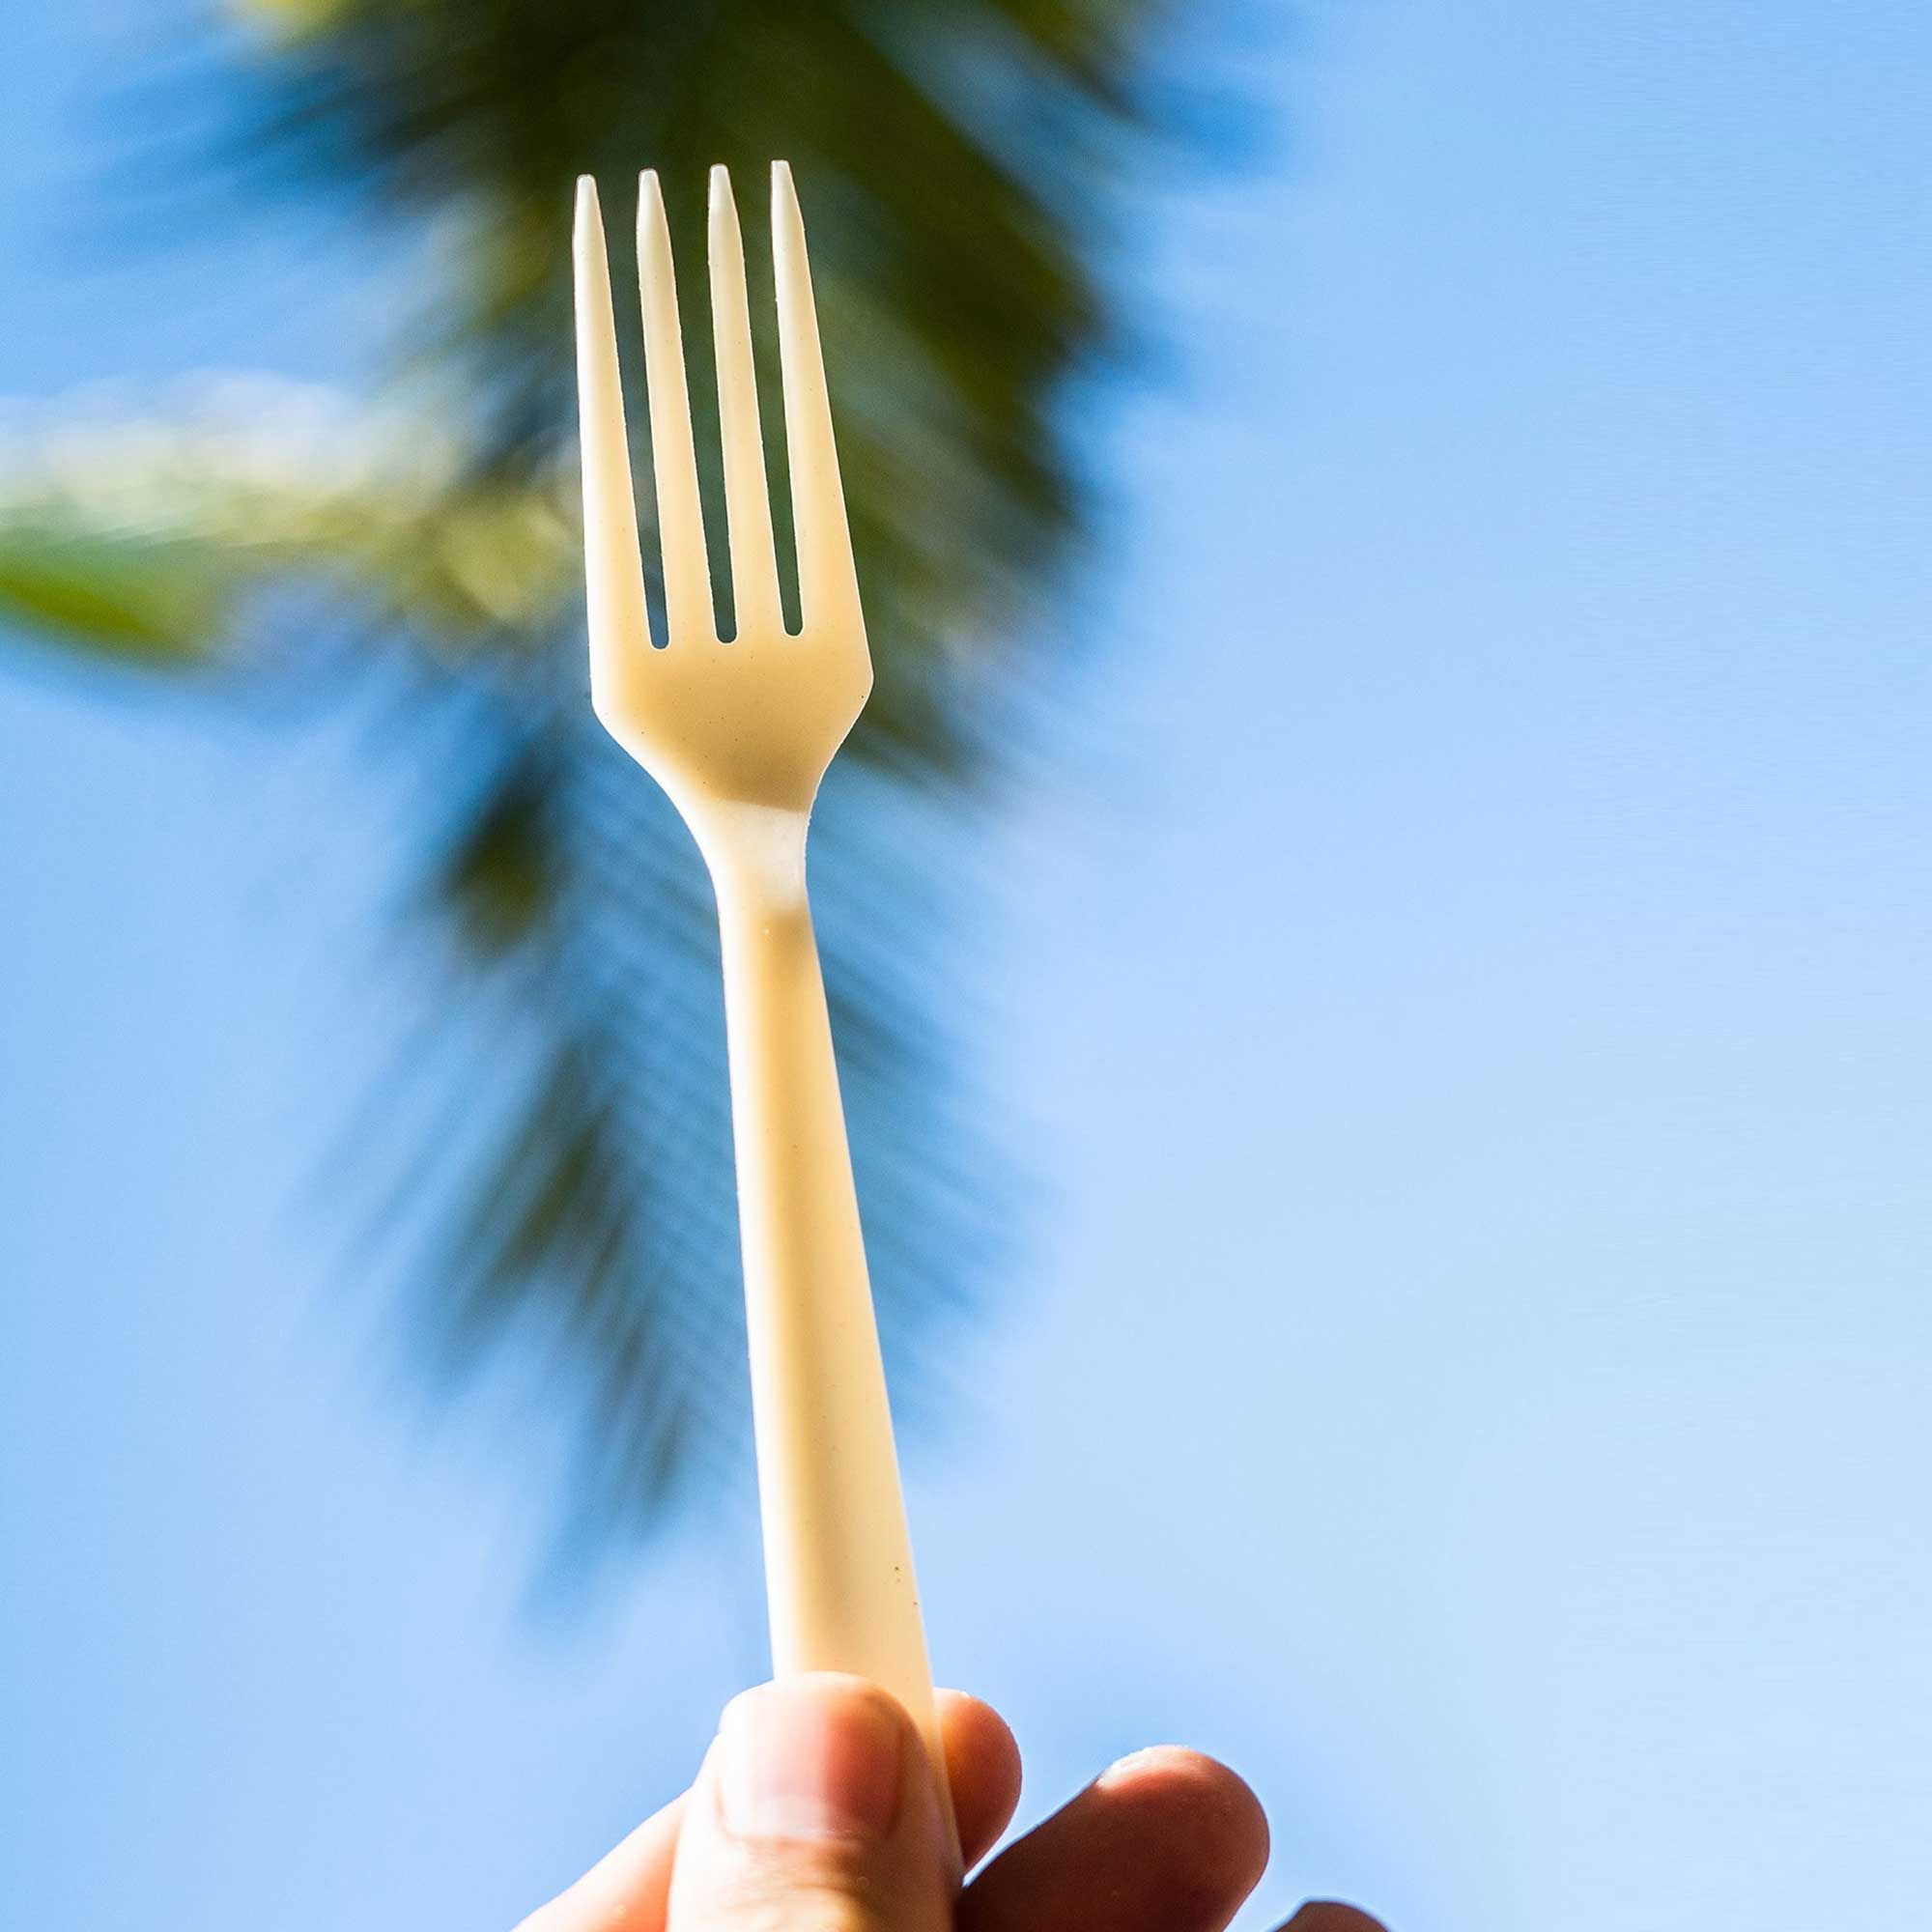 How Tiny Ocean Microorganisms Could Kill Your Plastic Fork